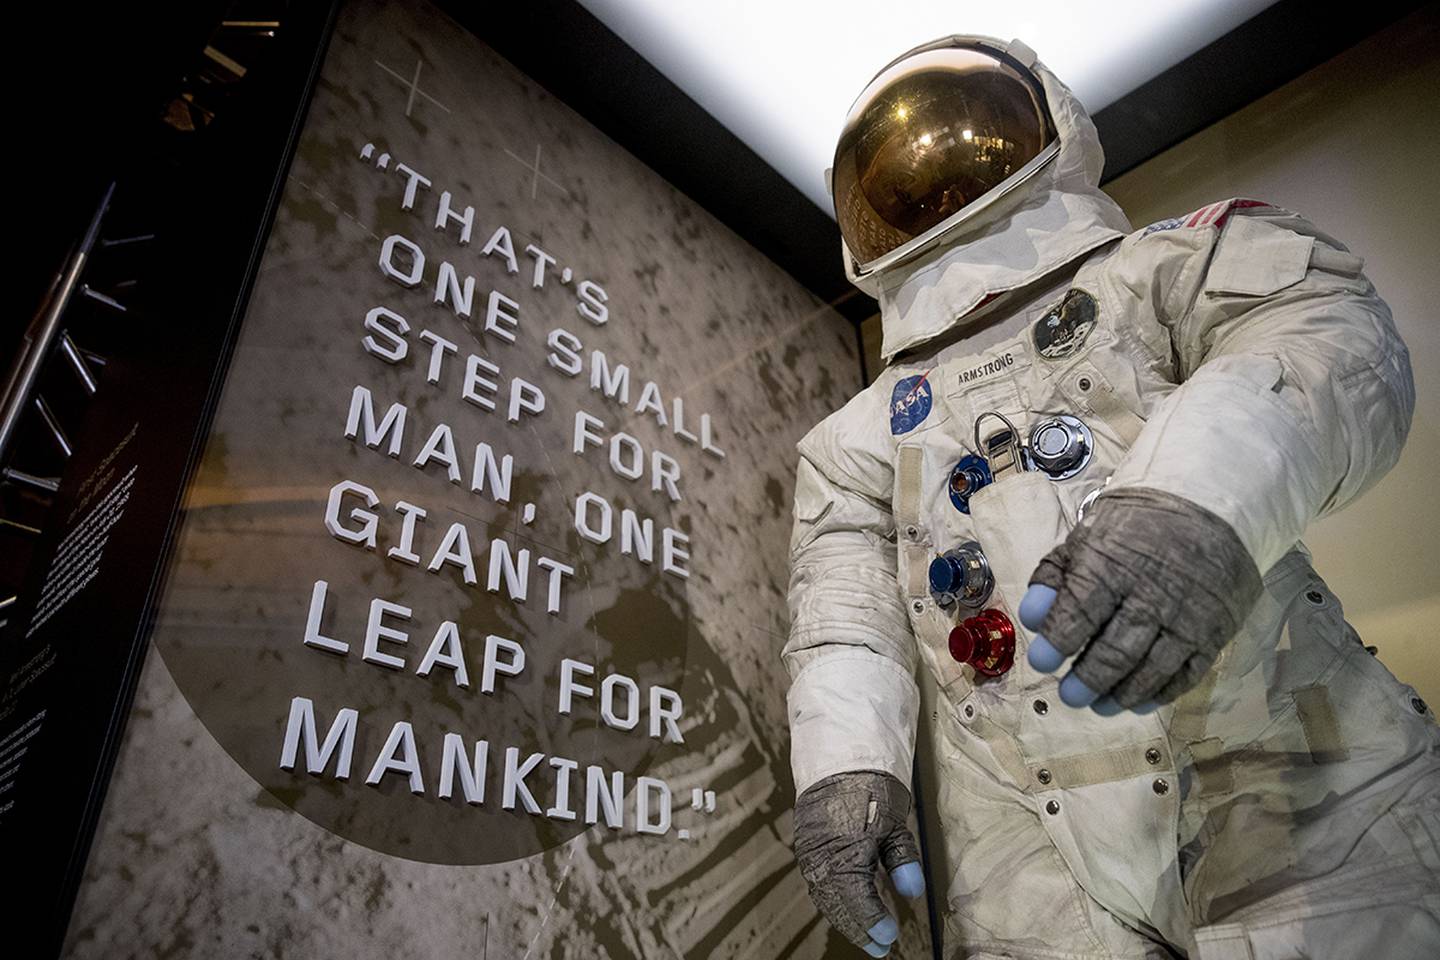 Neil Armstrong's Apollo 11 spacesuit is unveiled at the Smithsonian's National Air and Space Museum on the National Mall in Washington, Tuesday, July 16, 2019.